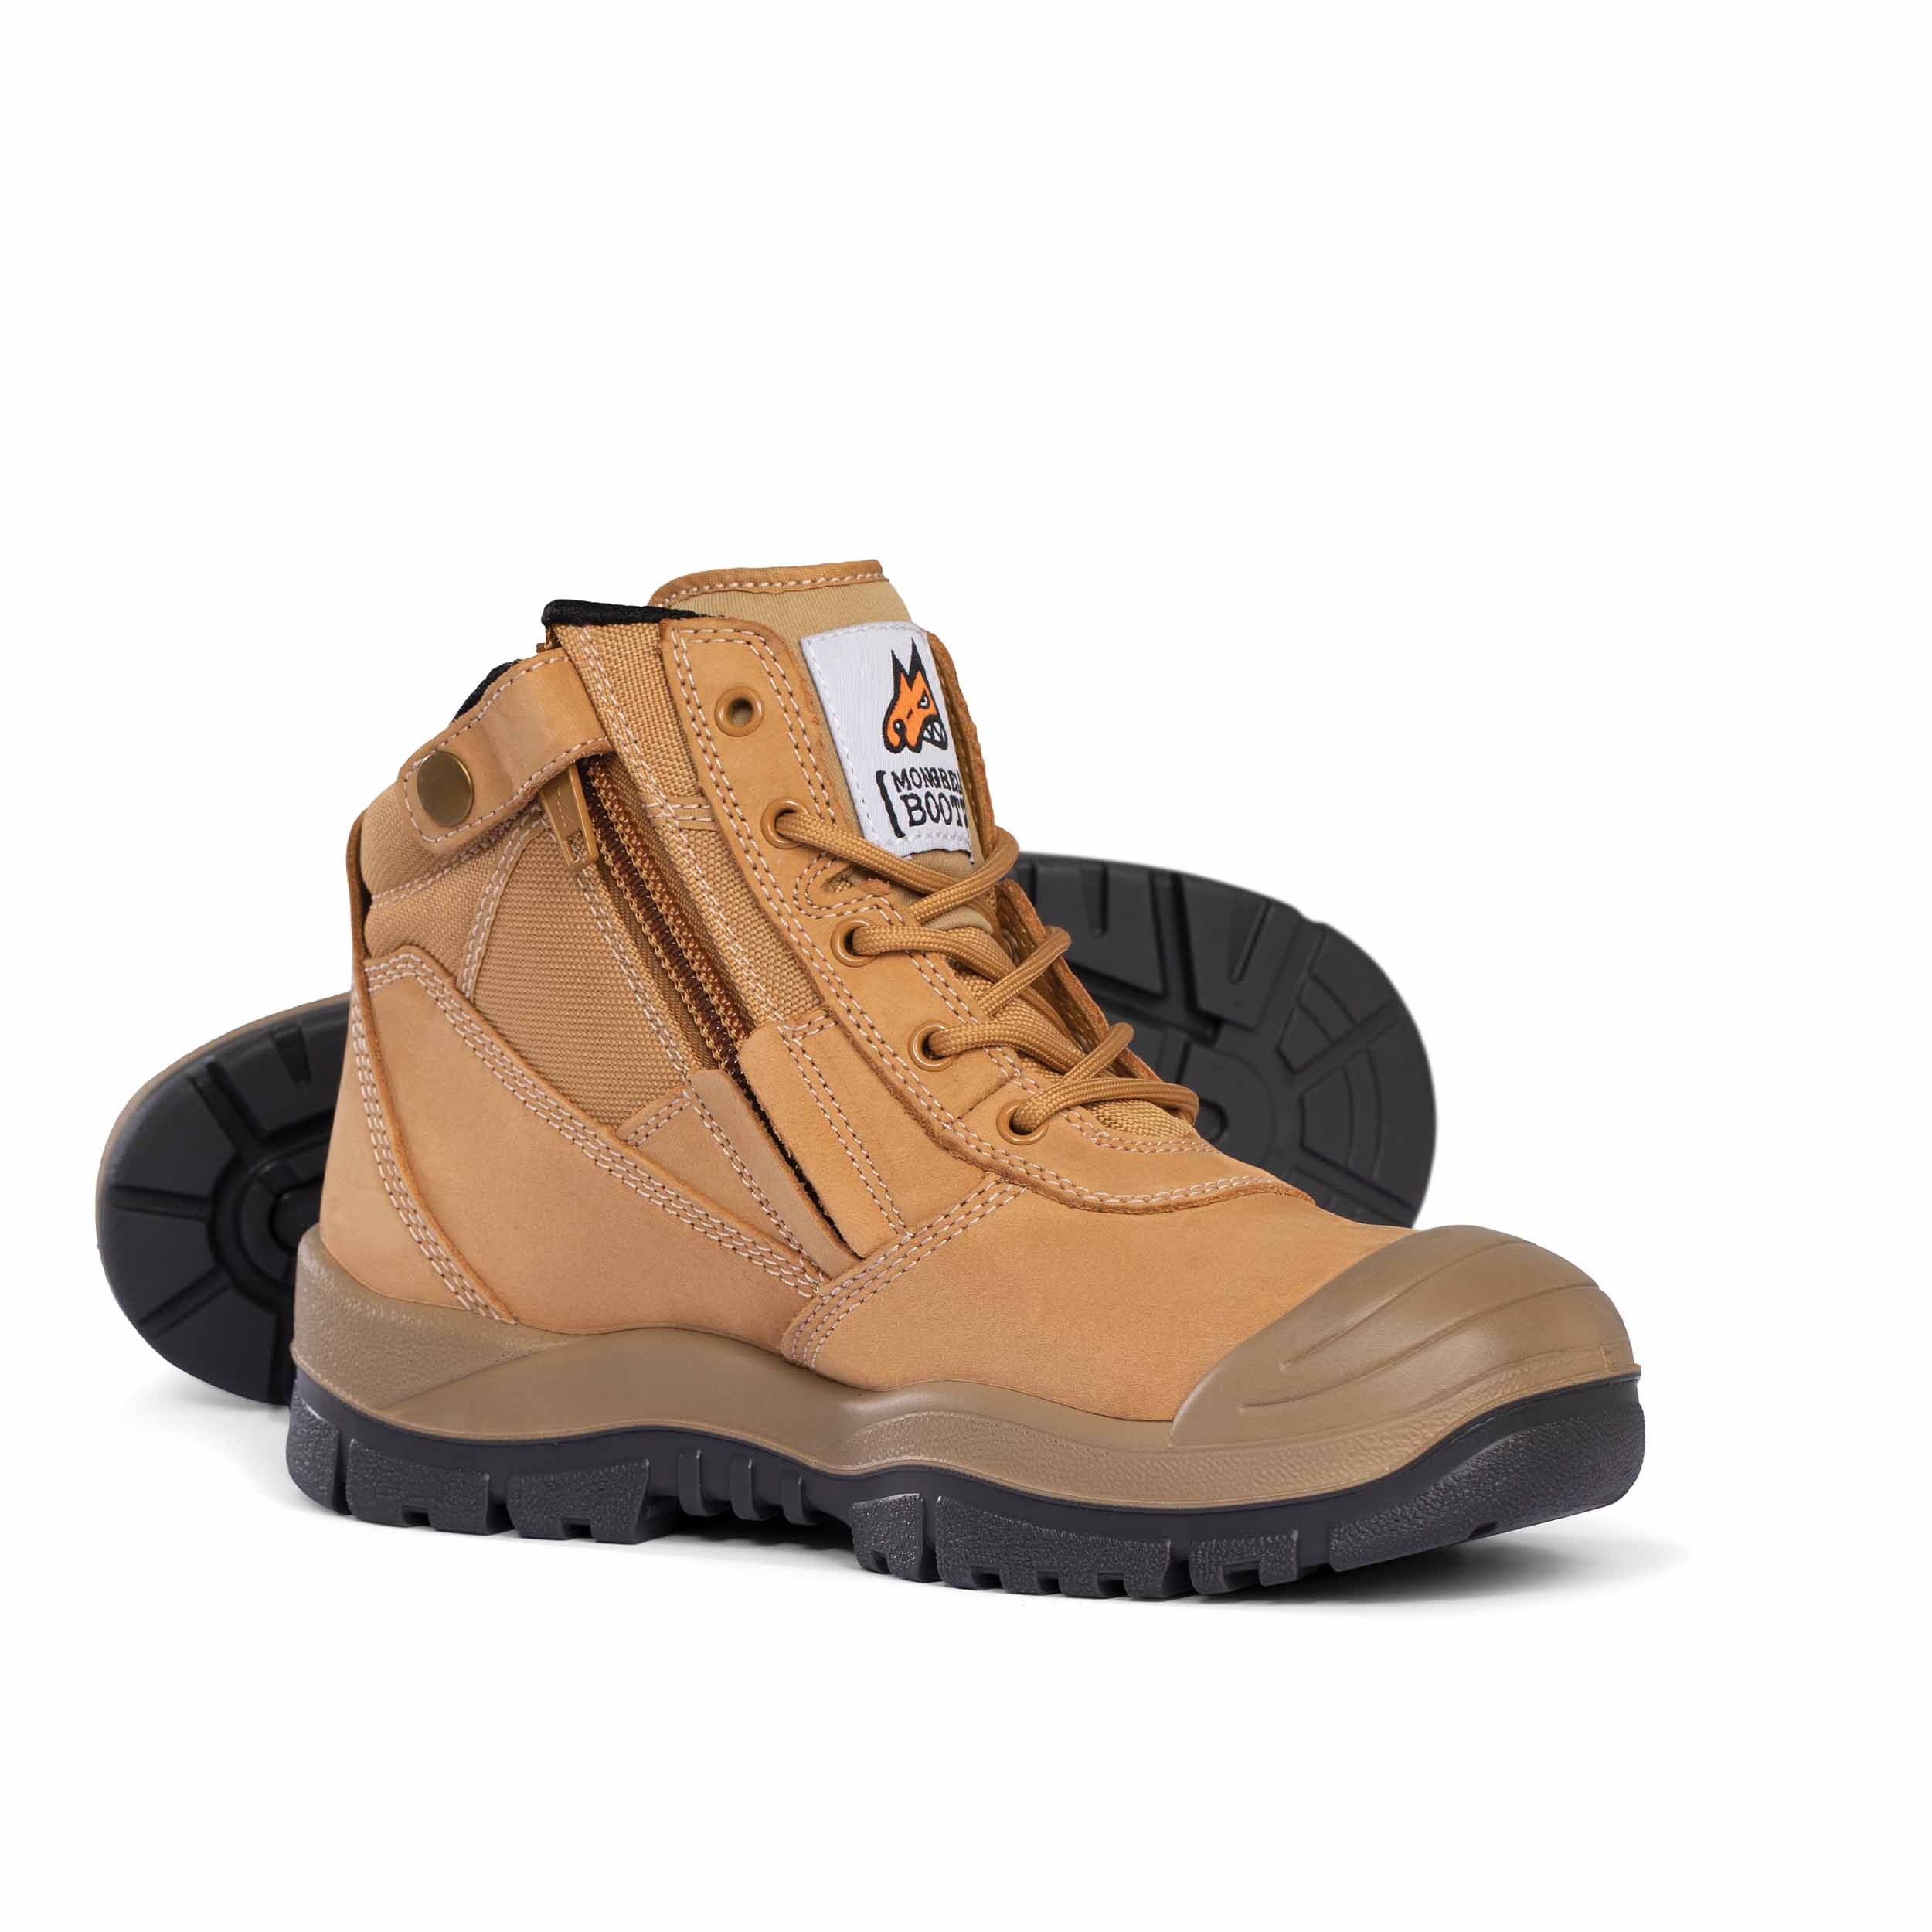 Mongrel 461050 Wheat Zipsider Safety Boot With Scuff